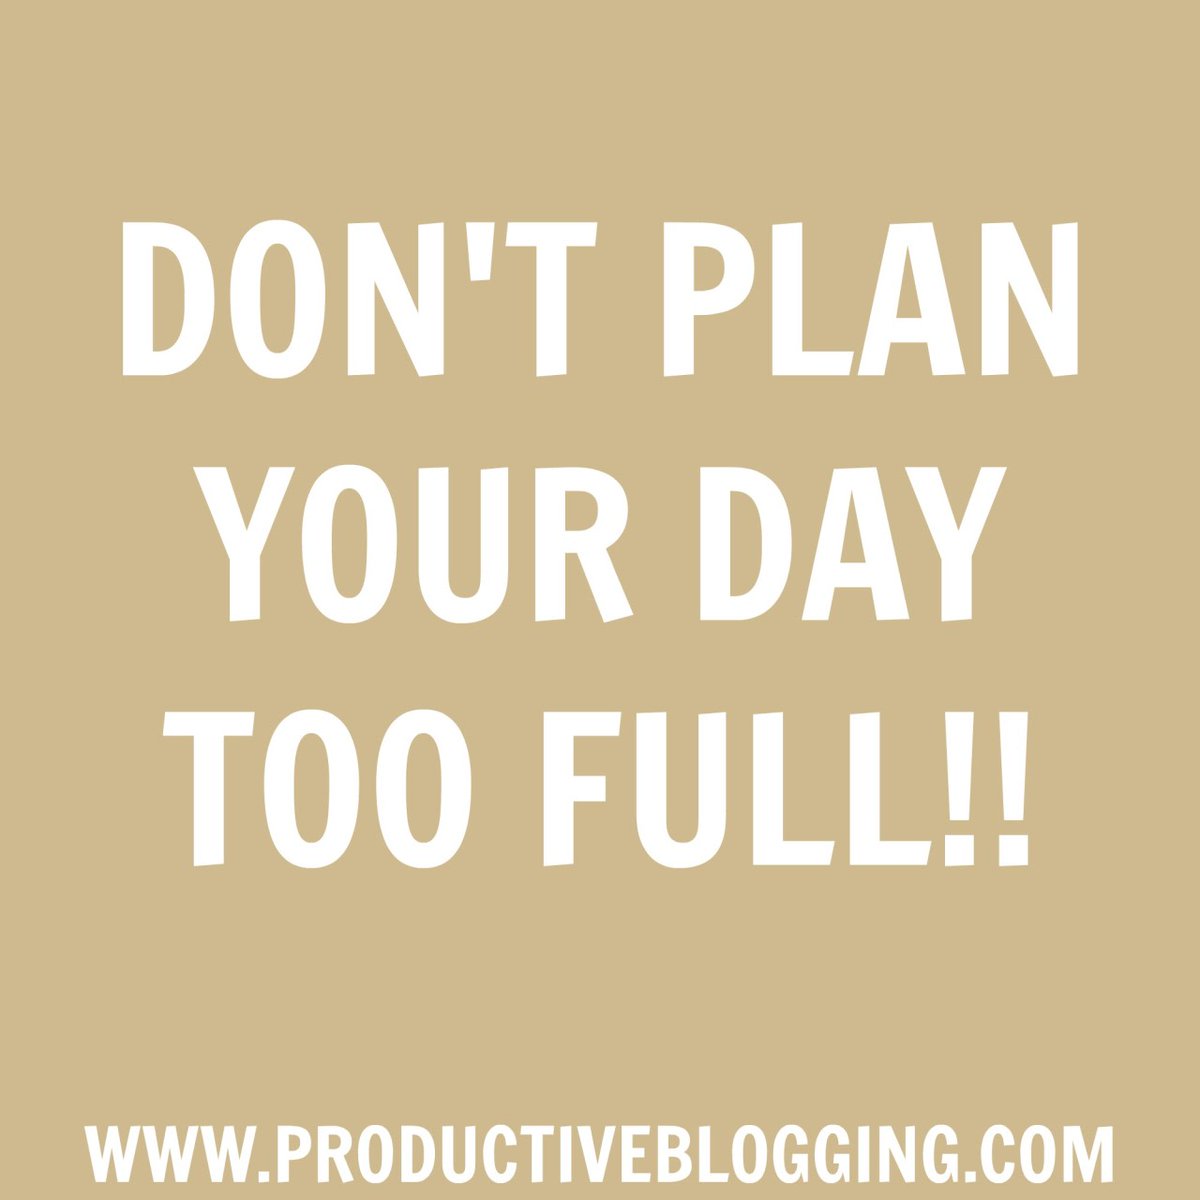 Don't plan your day too full!! It's oh so easy to put on your to do list waaay too much - more than you could ever fit into one day. Instead take the opposite approach - plan to do less than you can fit into your day. You will be happier and more productive. #wednesdaywisdom